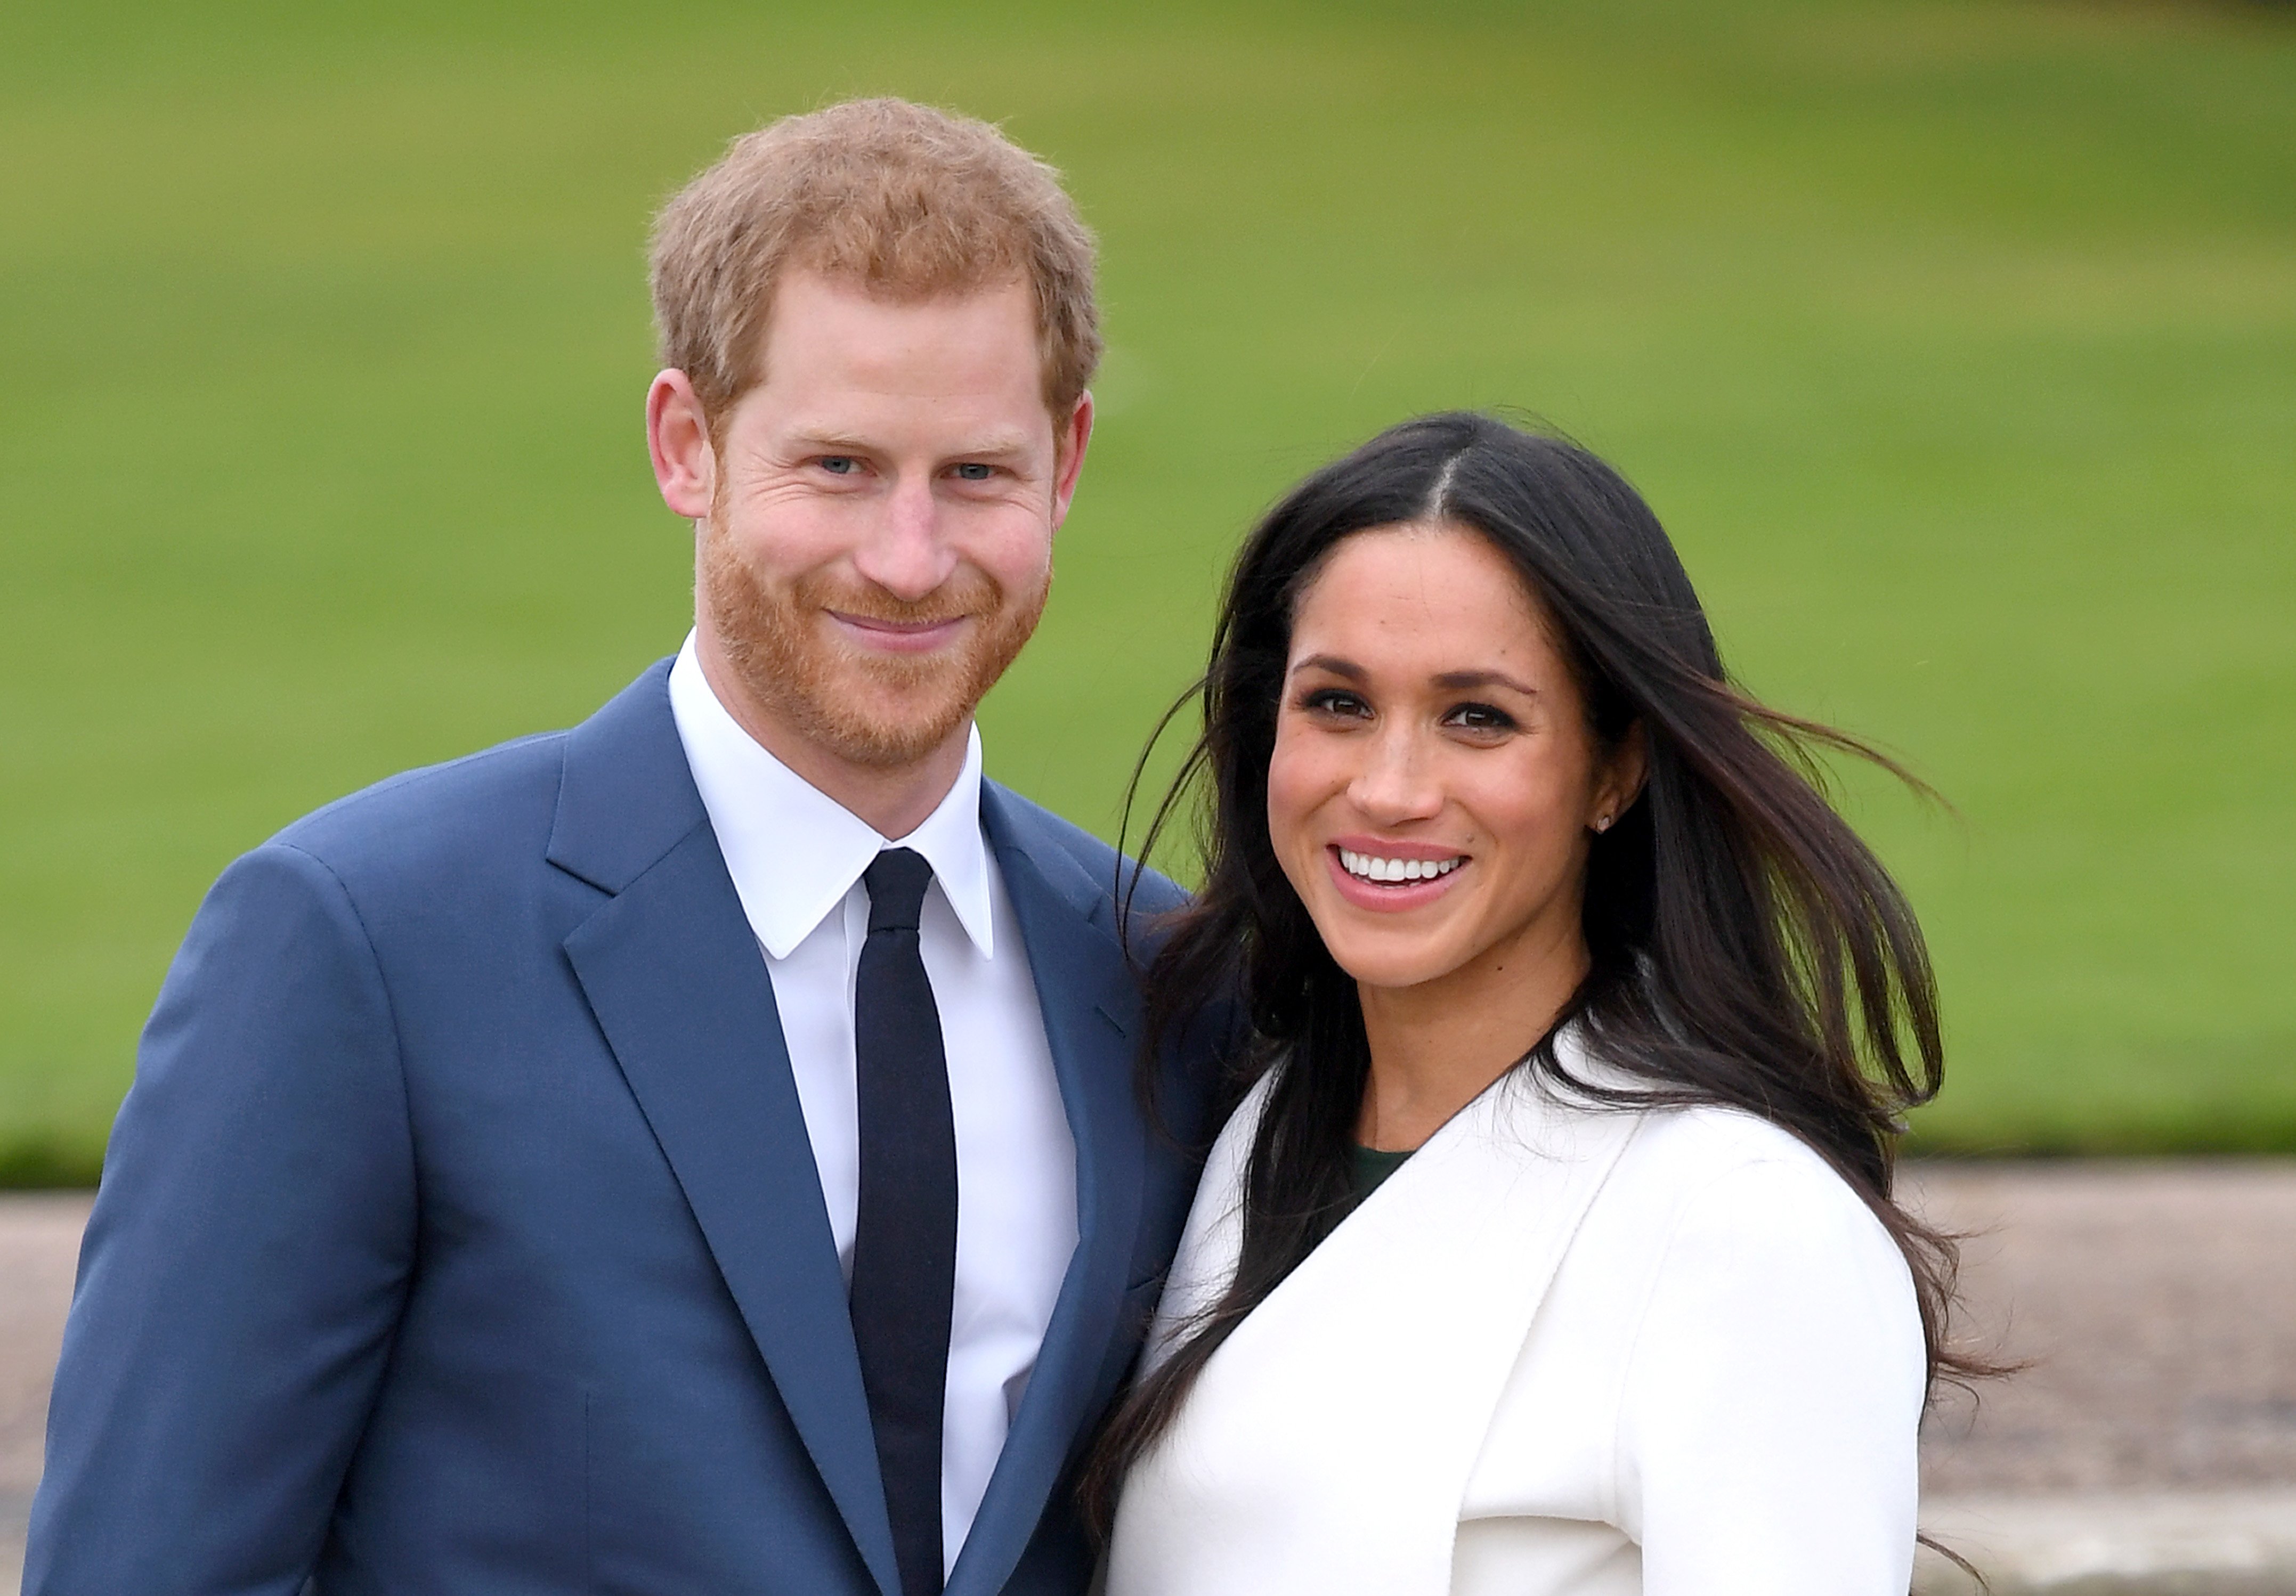 Prince Harry and Meghan Markle pictured official photoshoot to announce their engagement, 2017, London, England. | Photo: Getty Images